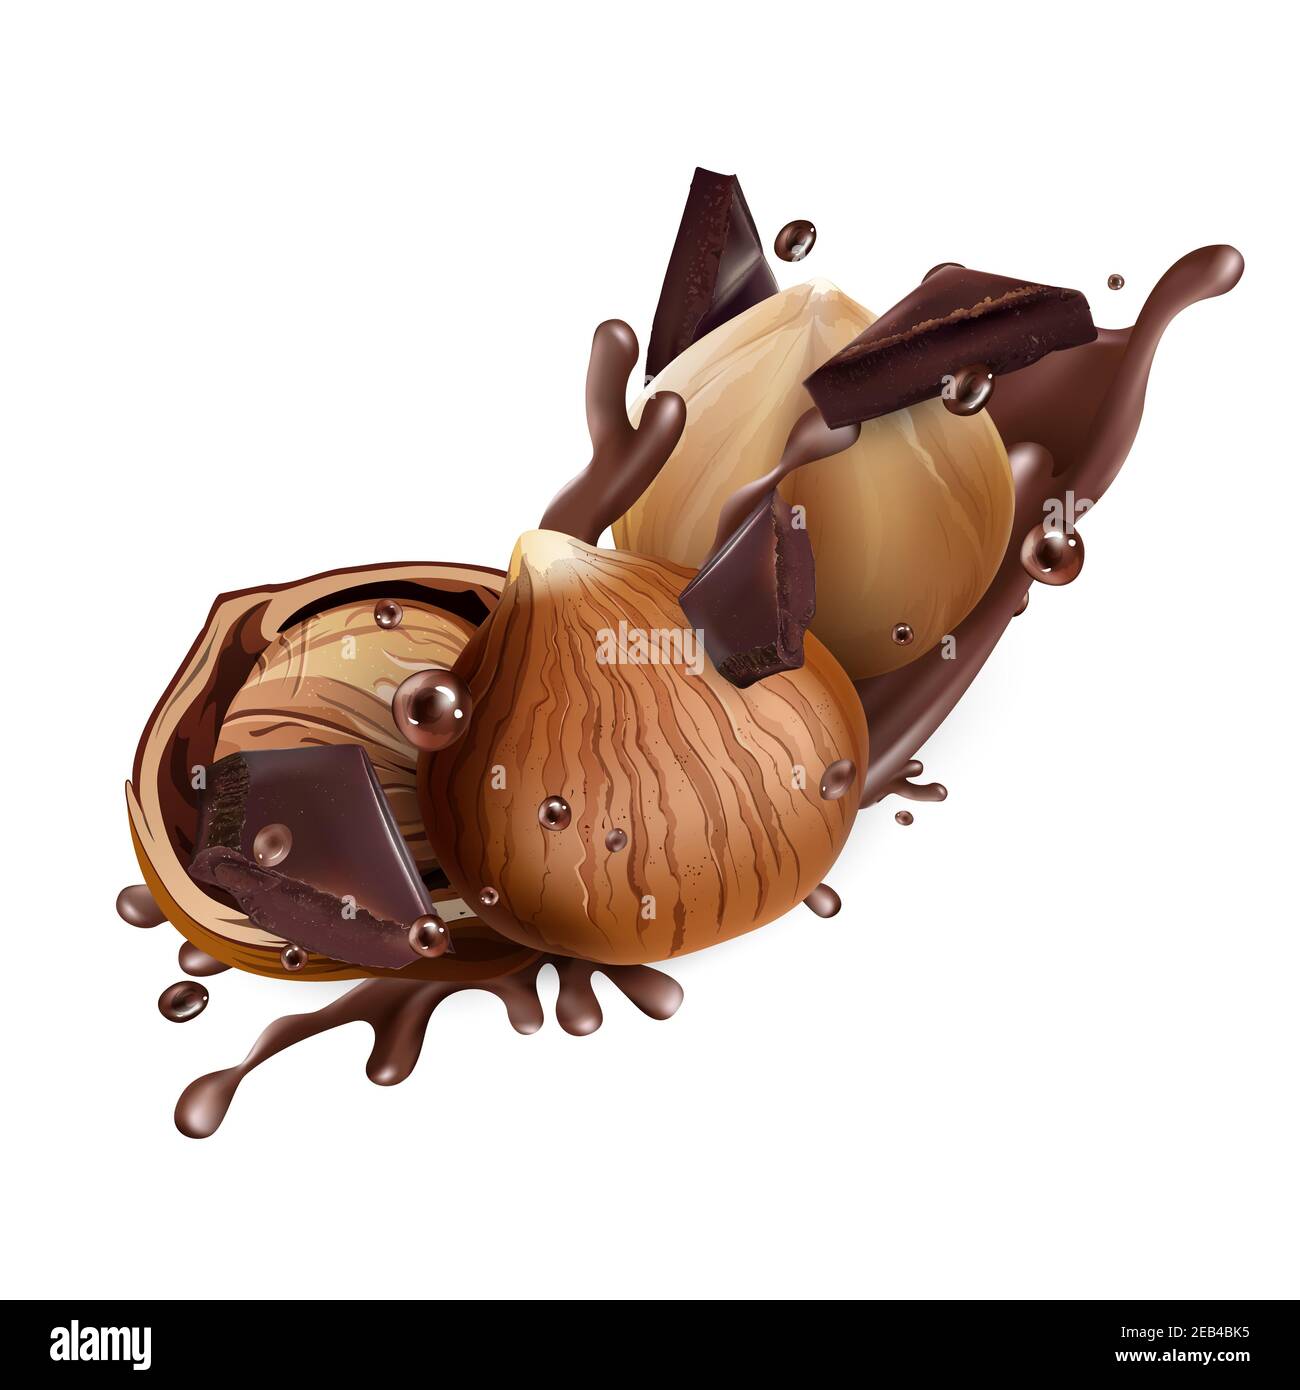 Hazelnuts with chocolate pieces and a splash of chocolate. Stock Photo